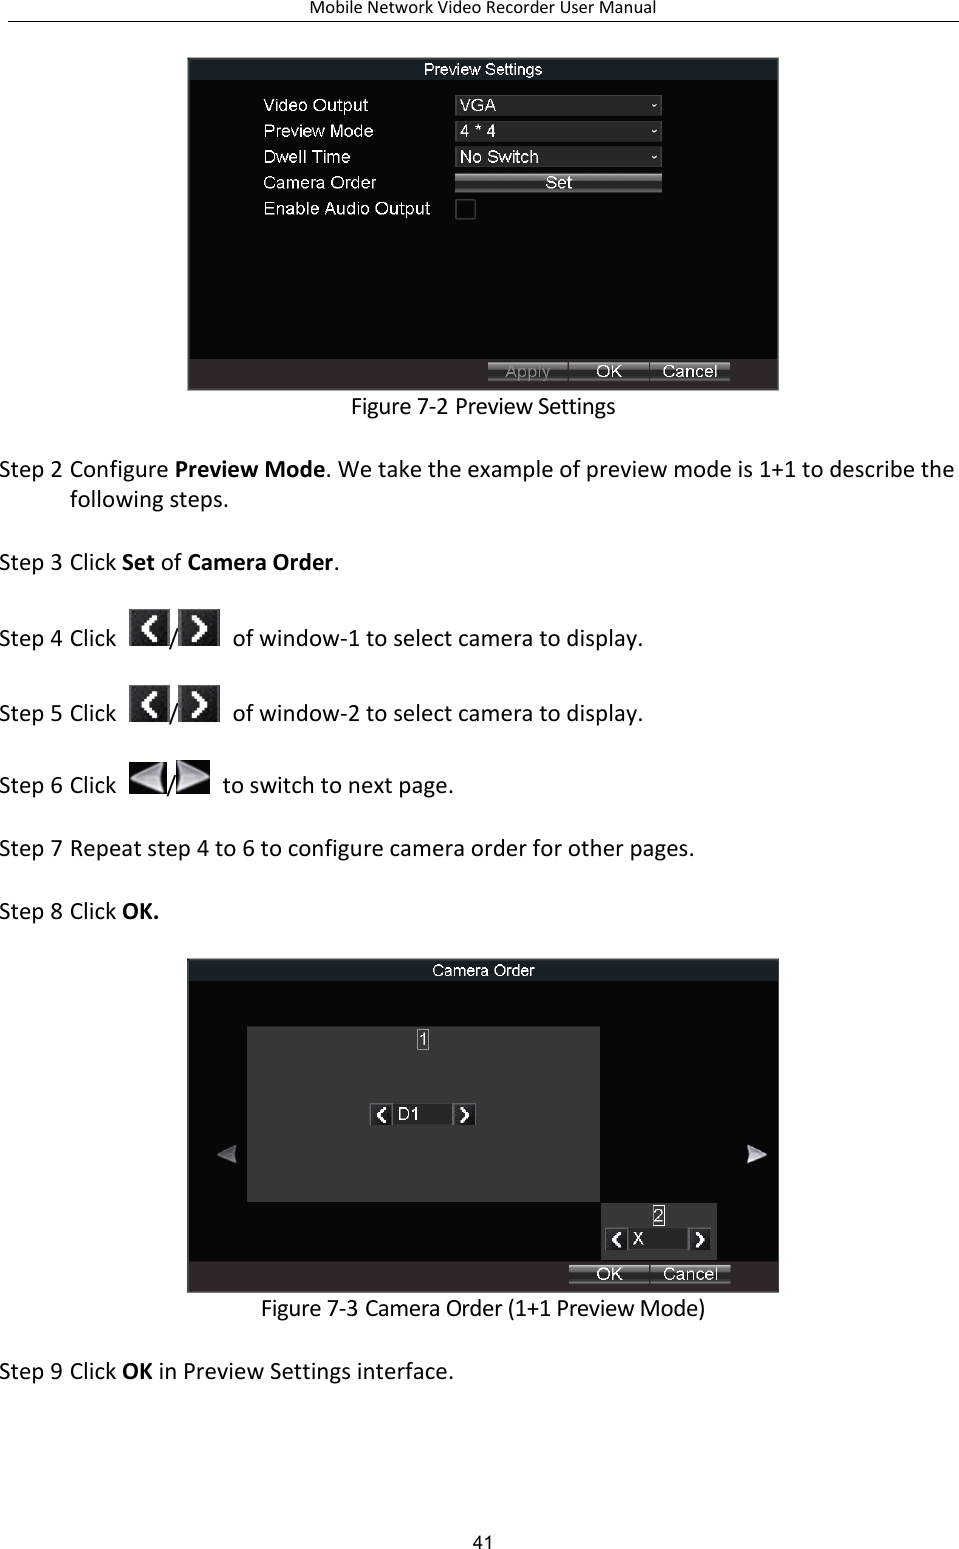 Mobile Network Video Recorder User Manual 41  Figure 7-2 Preview Settings Step 2 Configure Preview Mode. We take the example of preview mode is 1+1 to describe the following steps. Step 3 Click Set of Camera Order. Step 4 Click  /   of window-1 to select camera to display. Step 5 Click  /   of window-2 to select camera to display. Step 6 Click  /   to switch to next page. Step 7 Repeat step 4 to 6 to configure camera order for other pages. Step 8 Click OK.  Figure 7-3 Camera Order (1+1 Preview Mode) Step 9 Click OK in Preview Settings interface. 